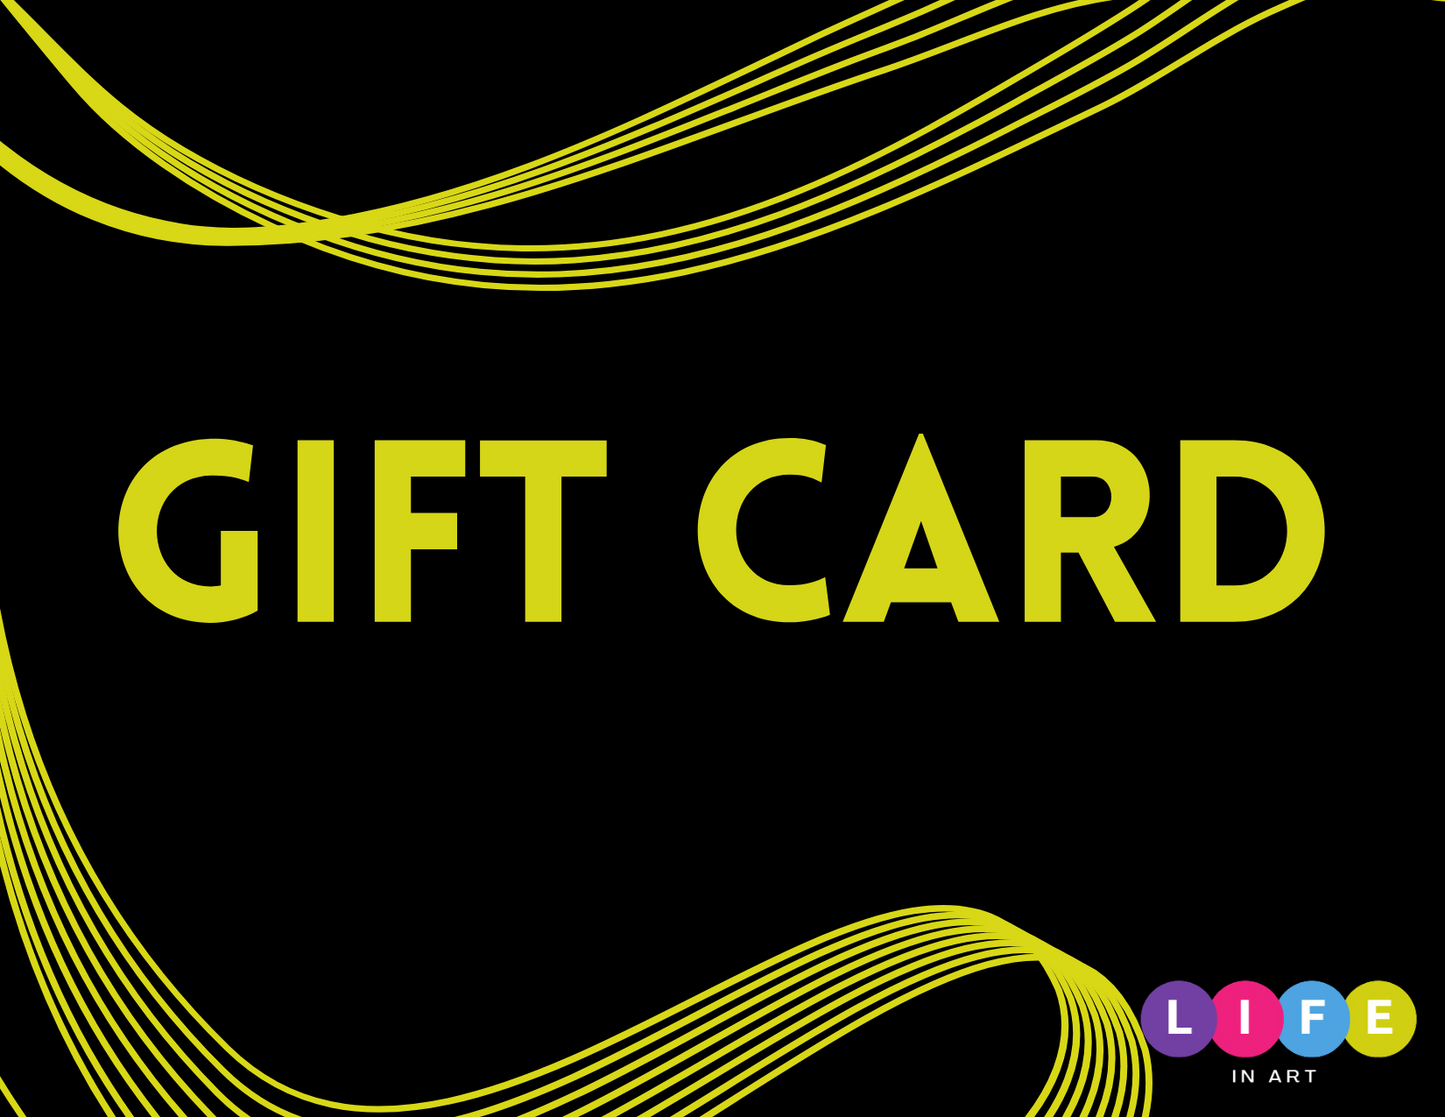 Life In Art Gift Card